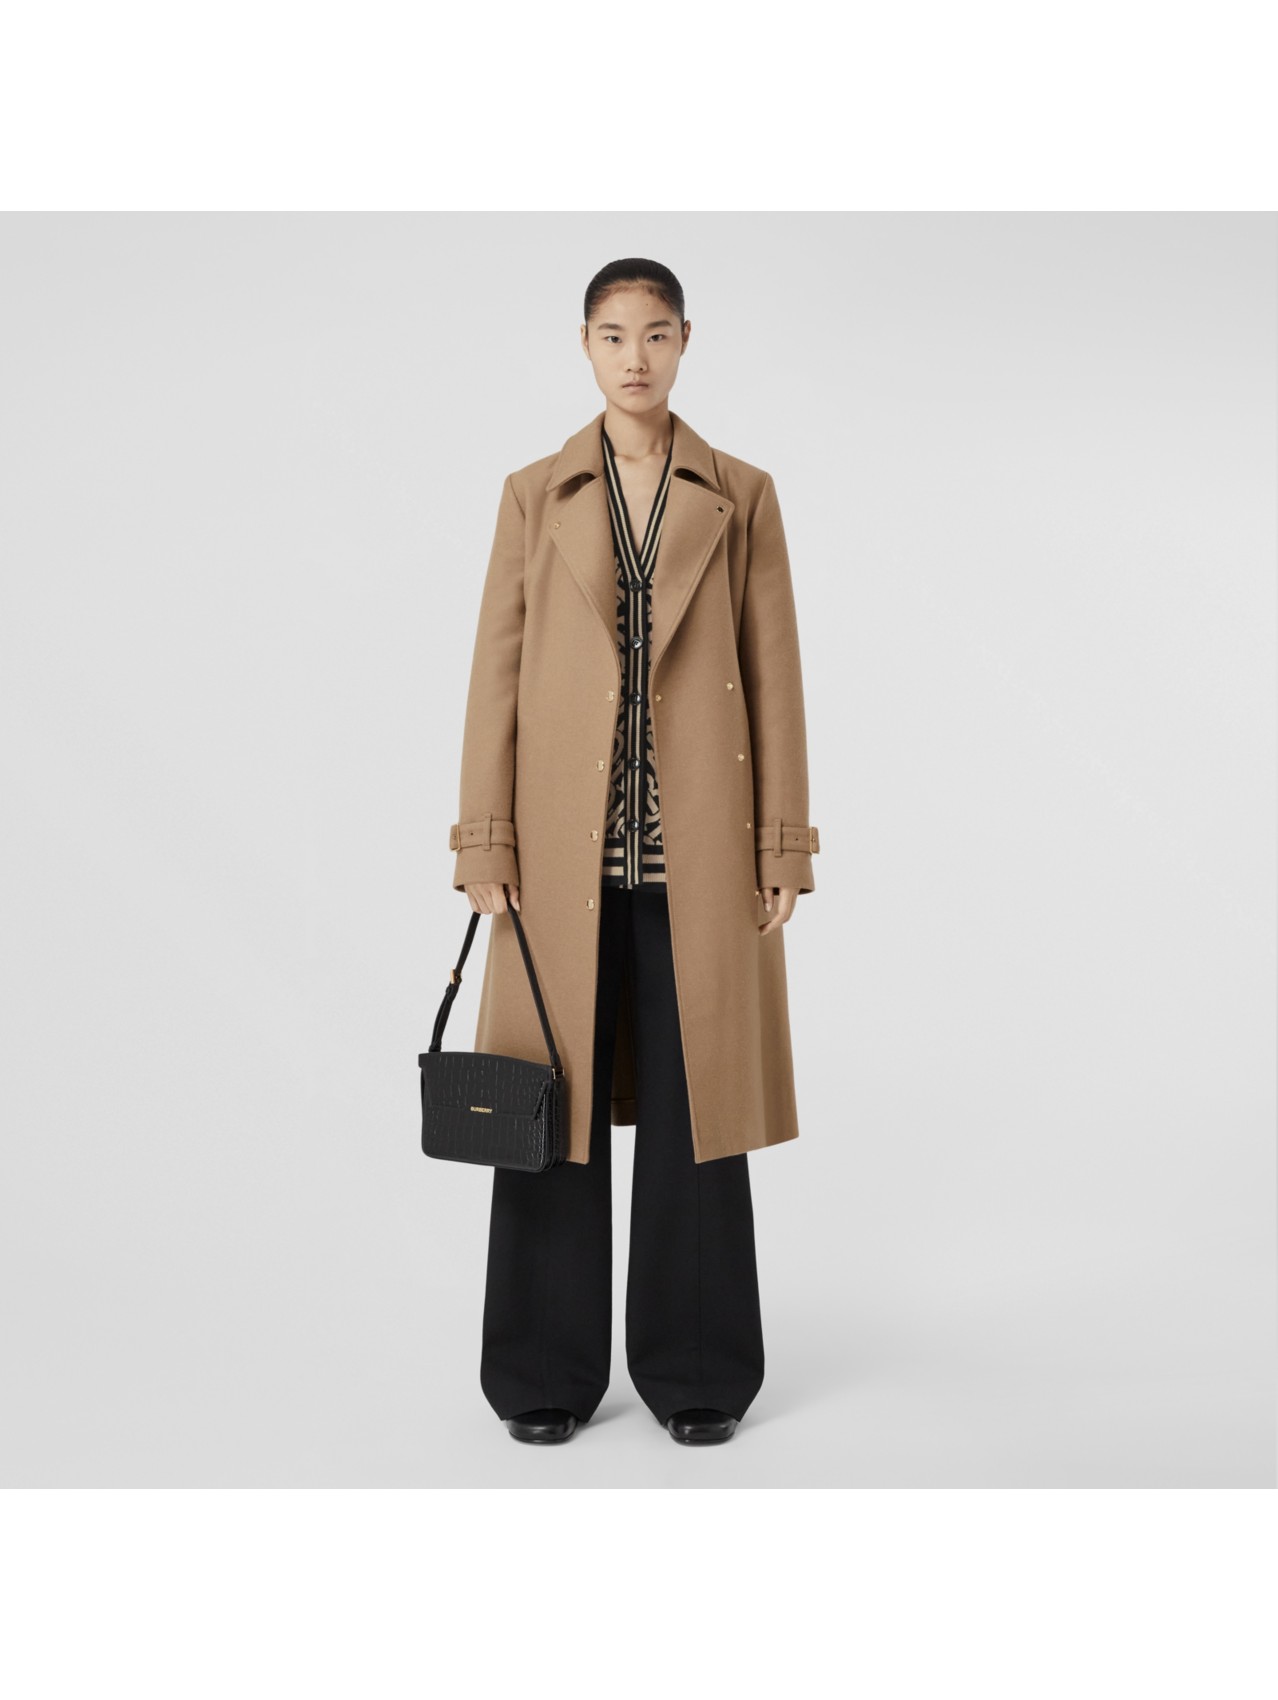 Cashmere Kensington Trench Coat in Dark Charcoal Blue - Women | Burberry®  Official